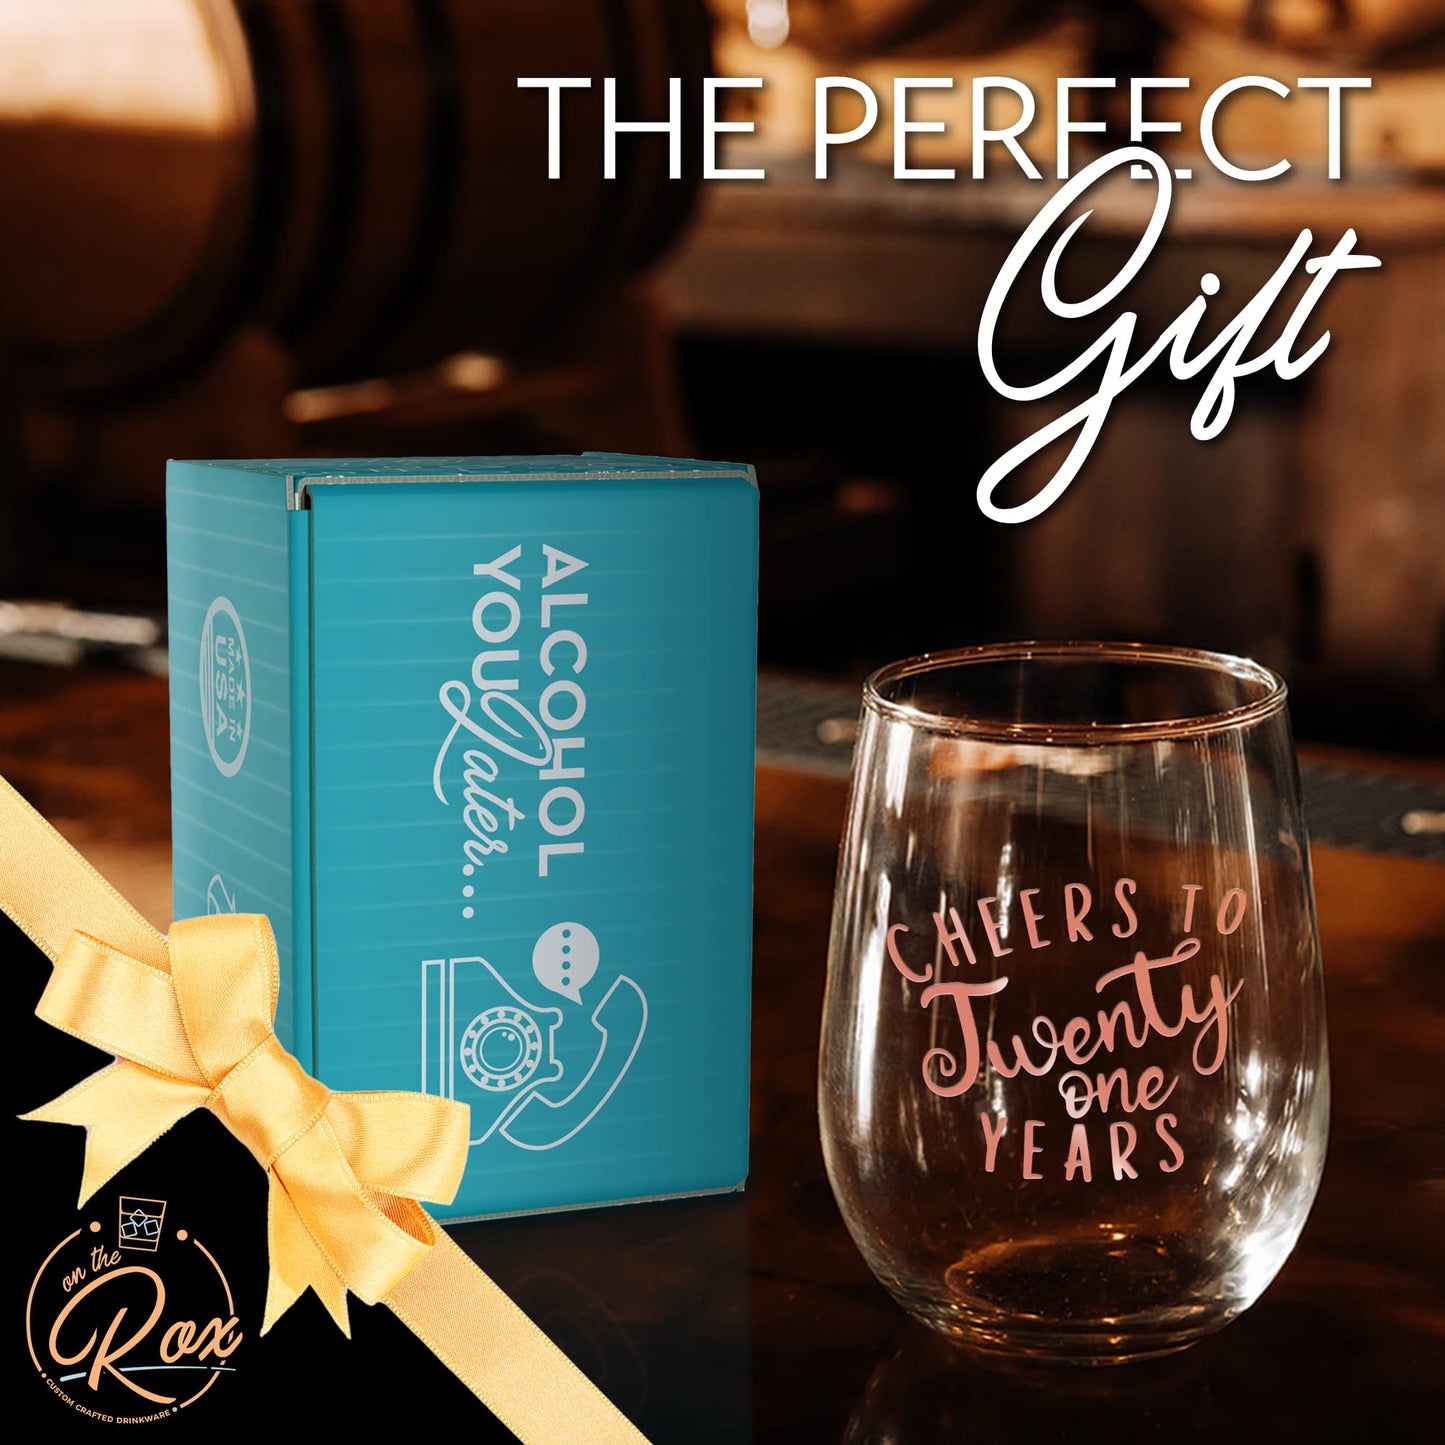 On The Rox Drinks 21st Birthday Stemless Wine Glass Gifts for Women - Cheers to 21 Years